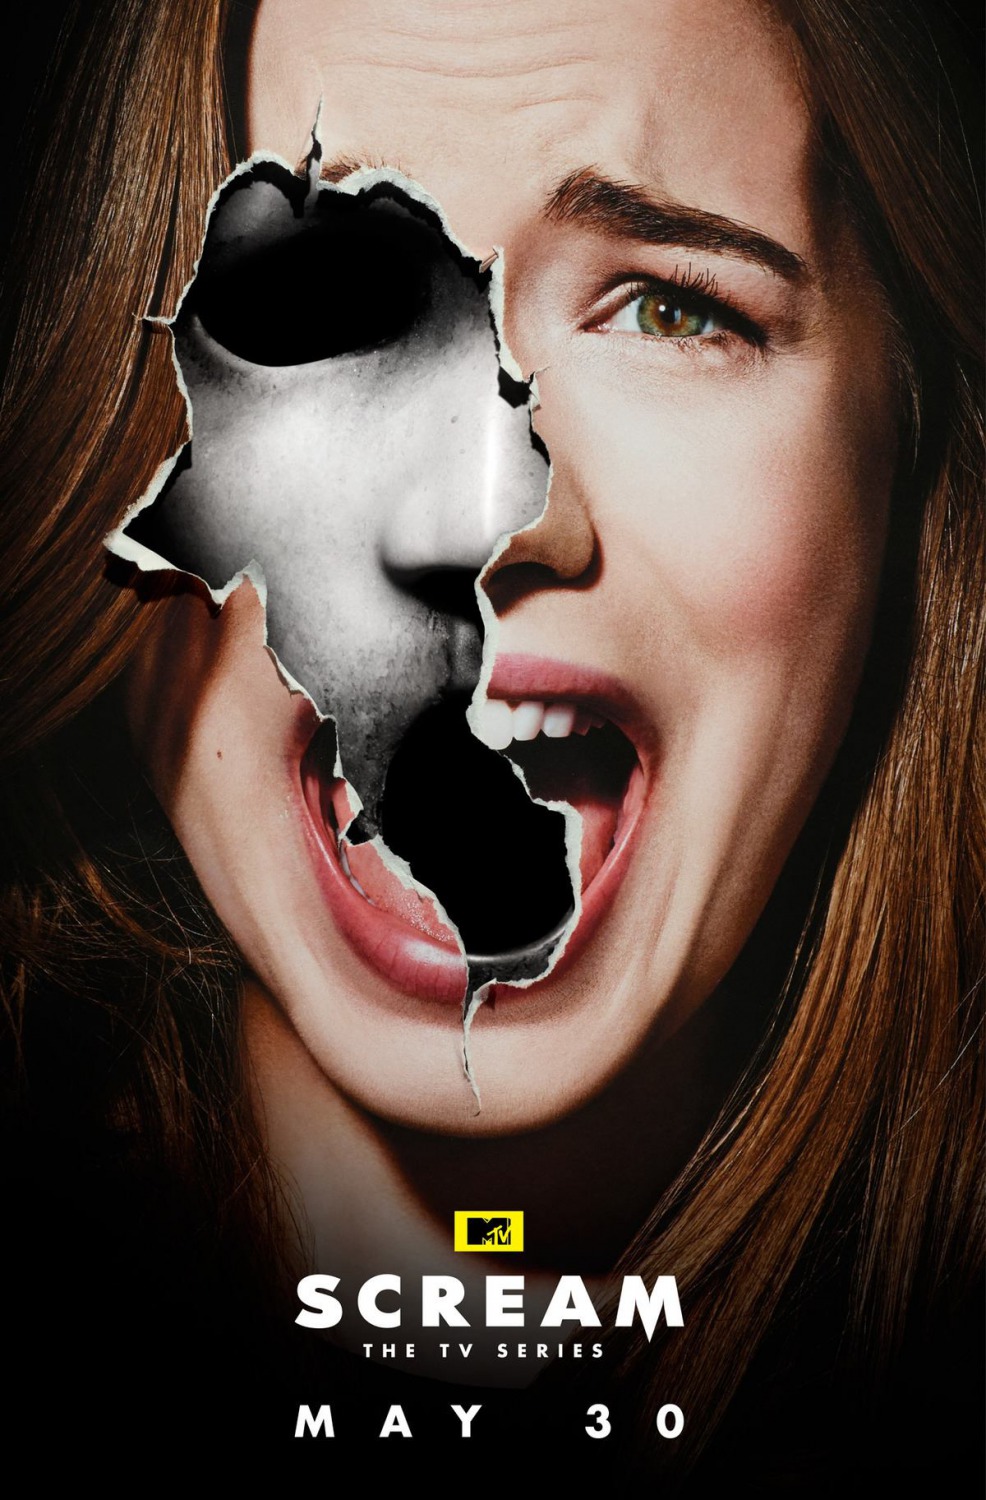 Extra Large TV Poster Image for Scream (#5 of 9)